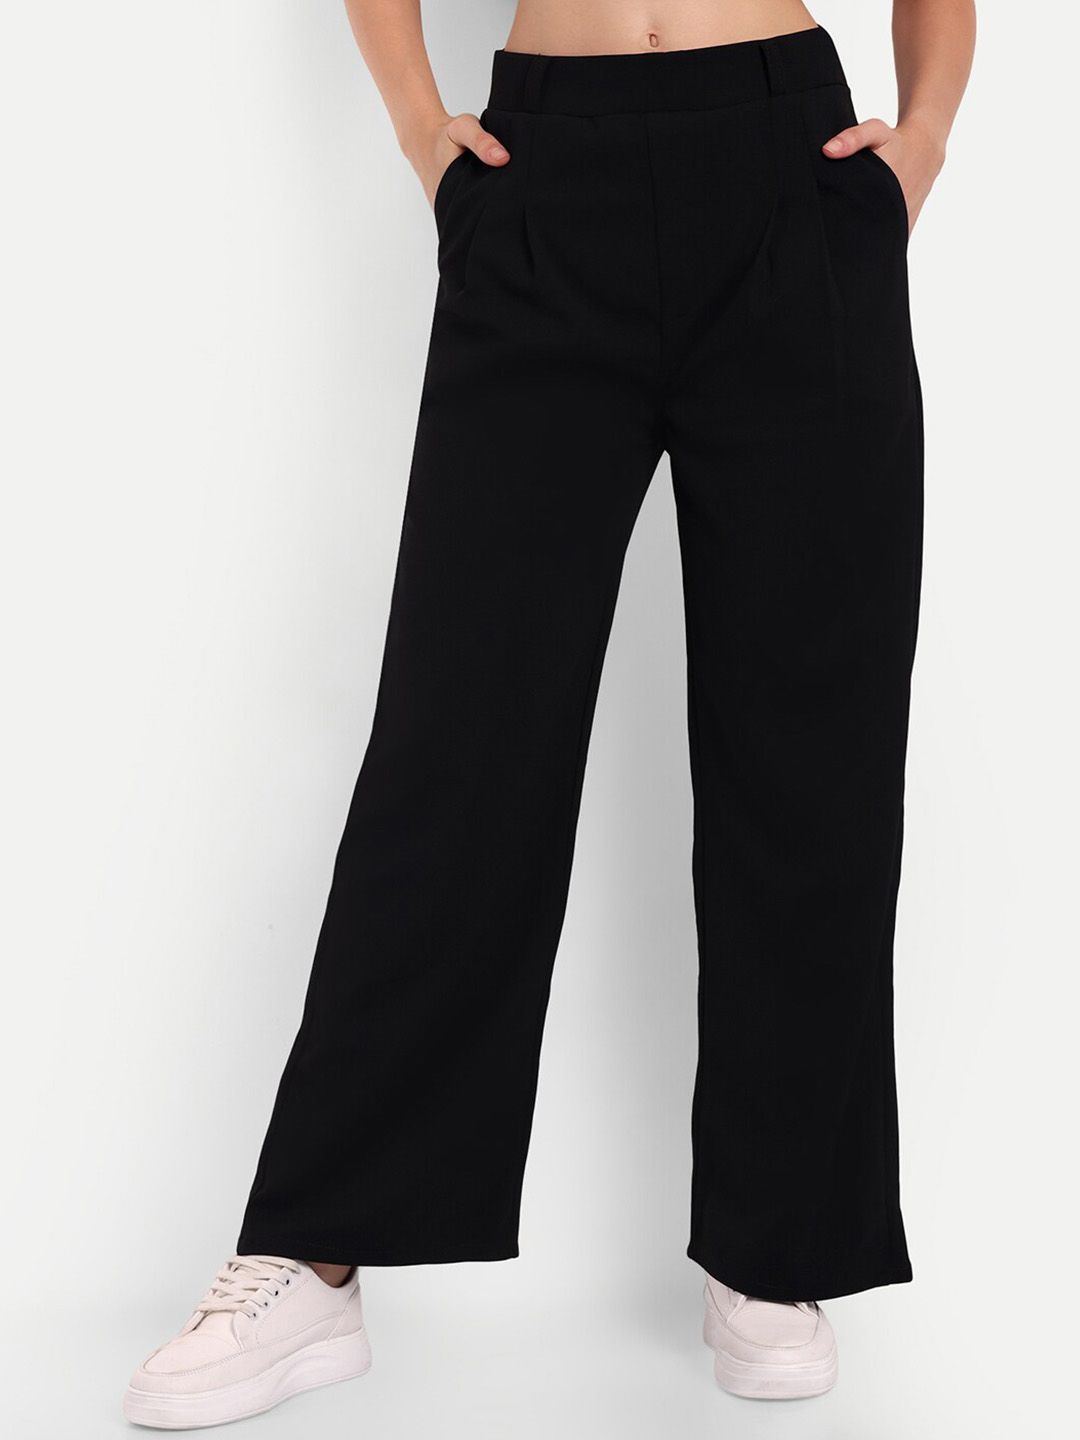 Next One Women Black Smart Loose Fit High-Rise Easy Wash Pleated Trousers Price in India